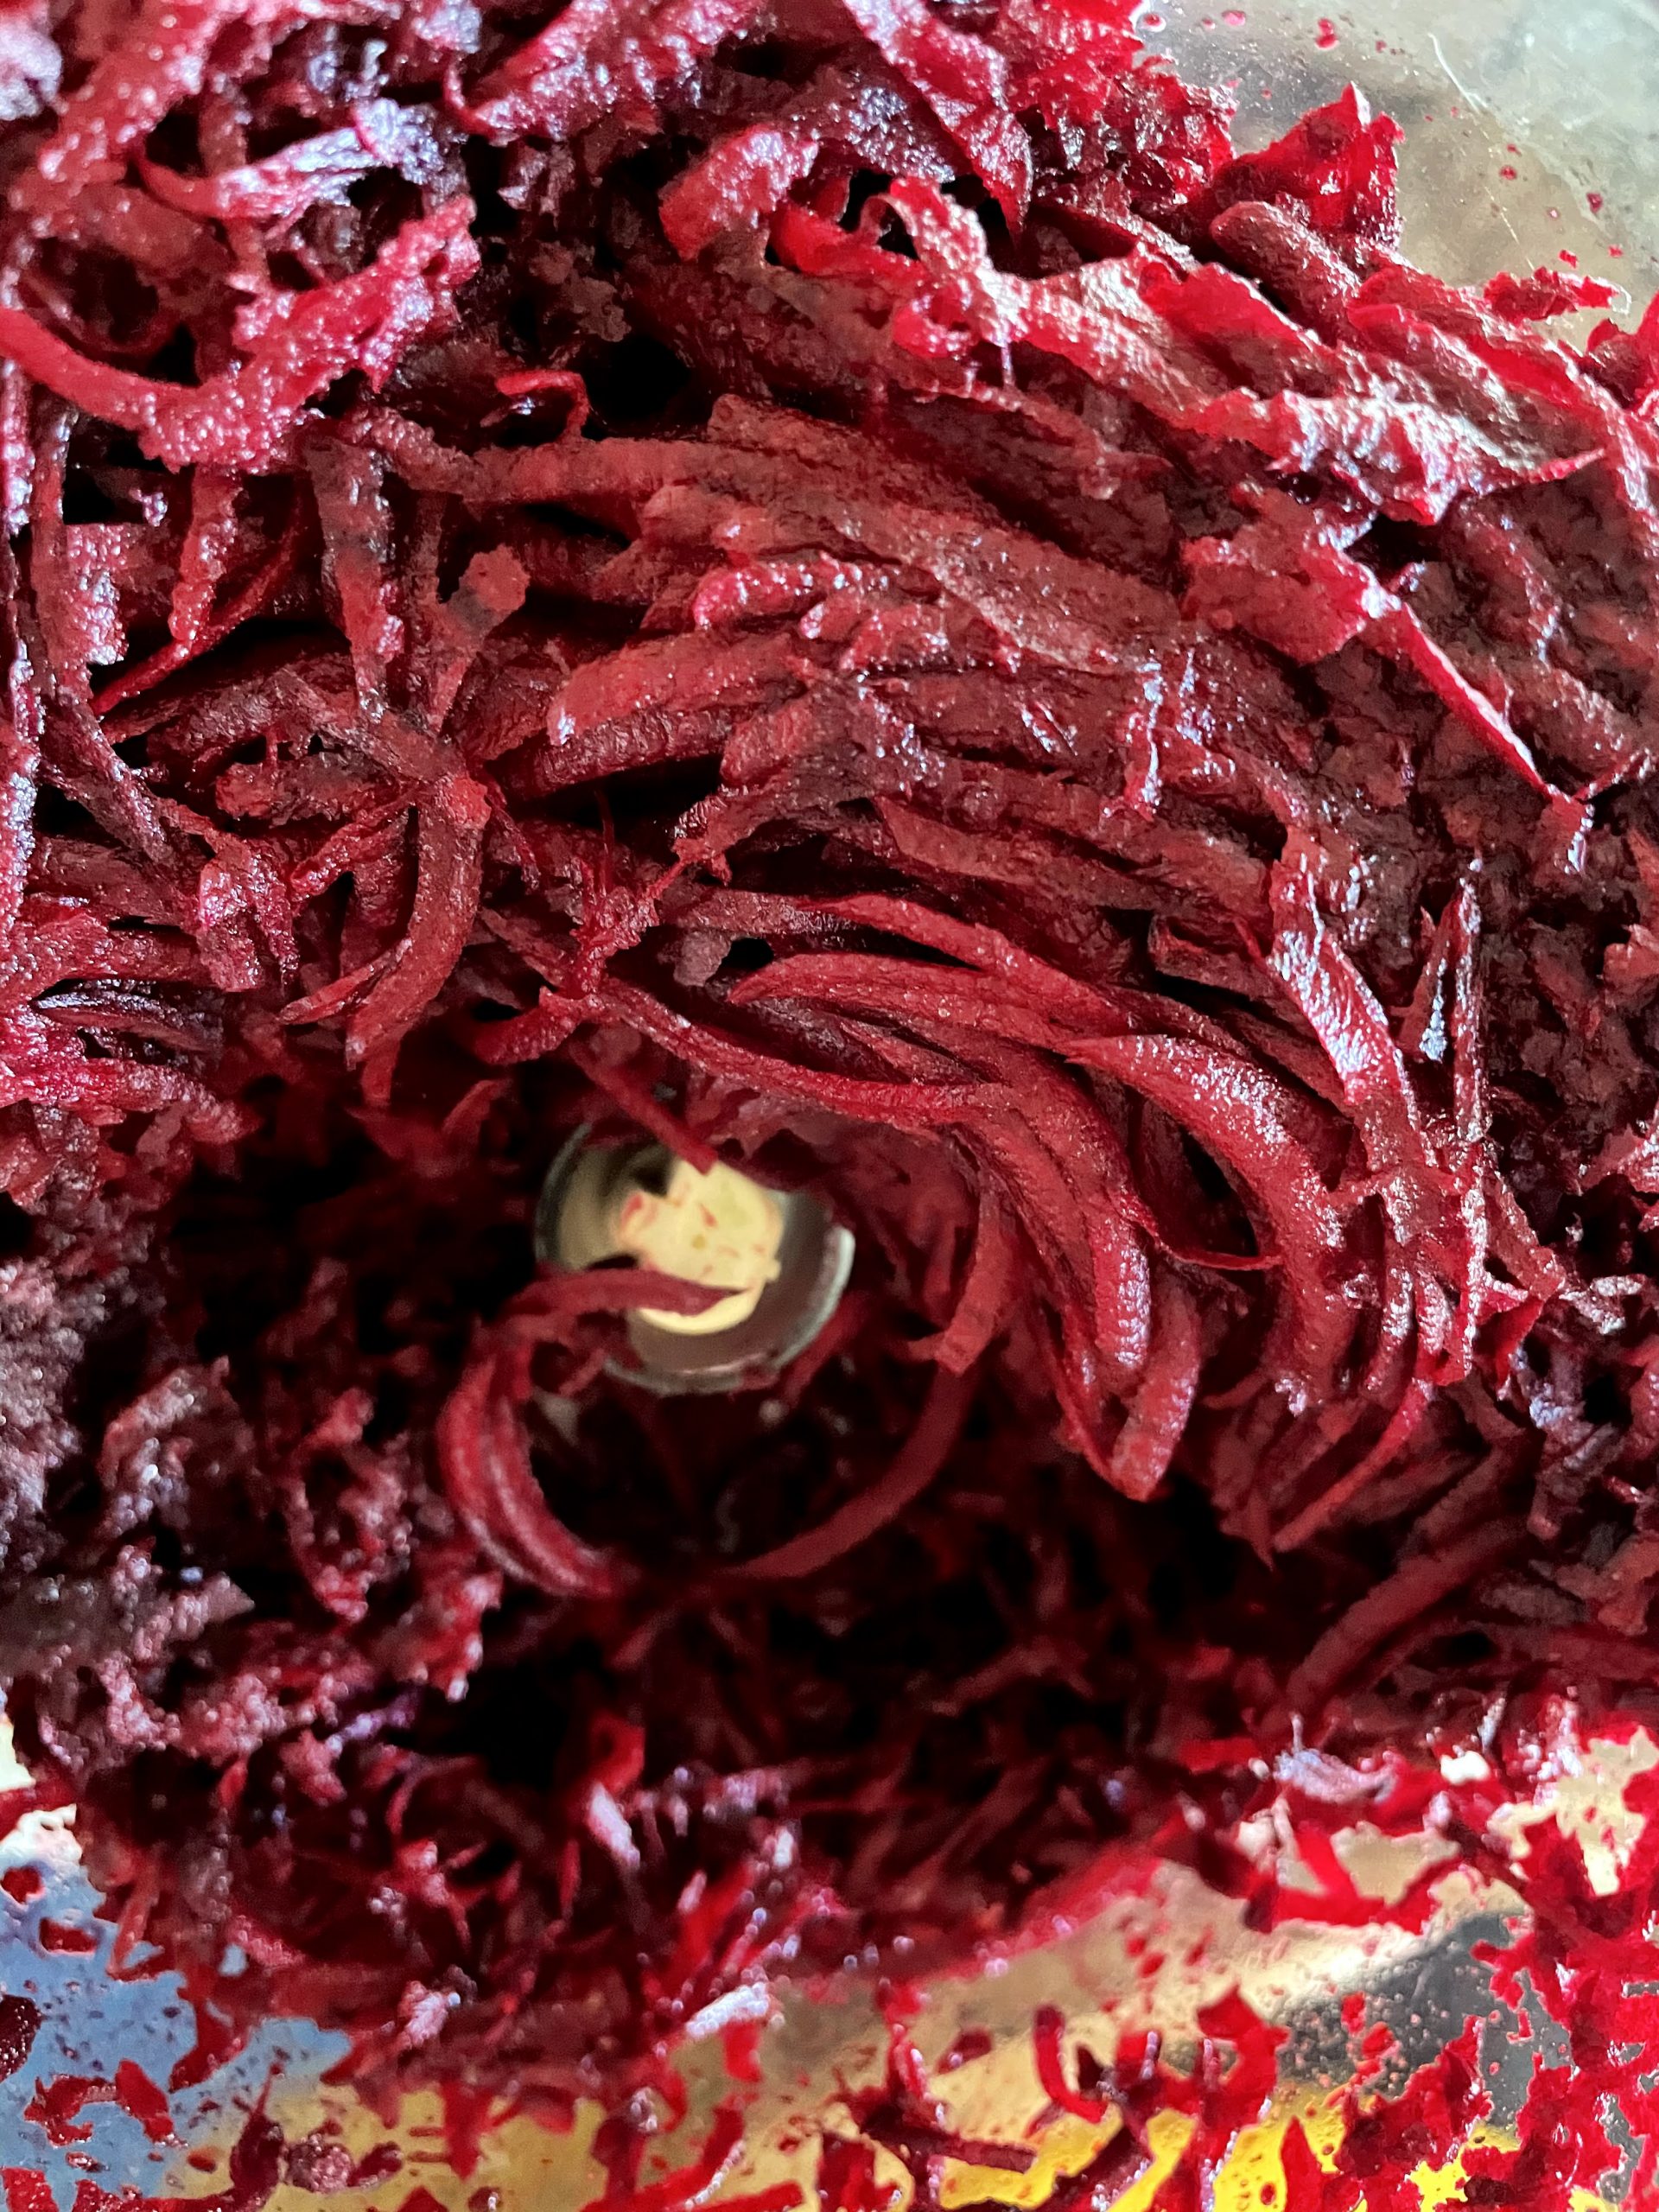 Use a grater or food processor to shred the beets.